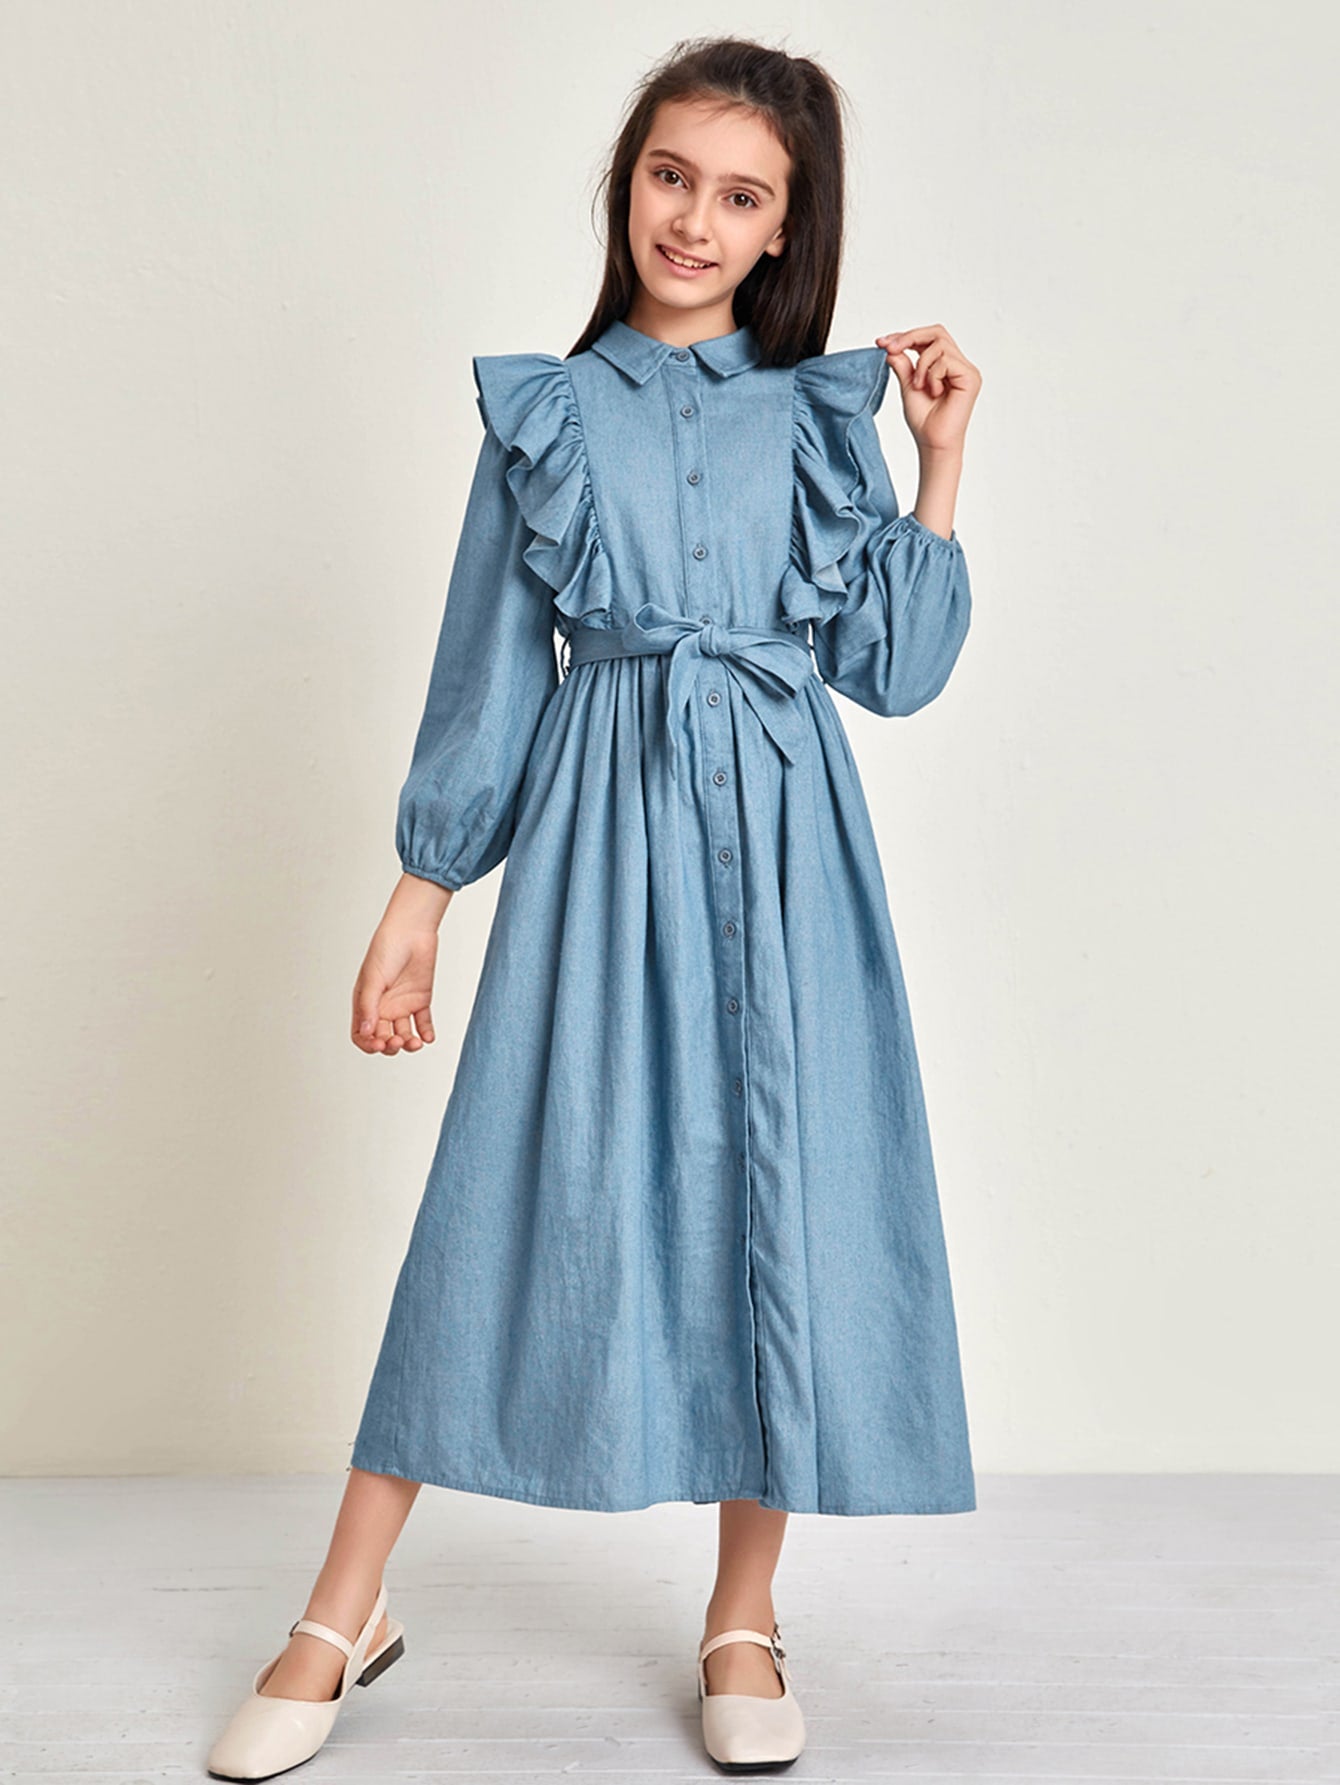 Girls Collared Buttoned Front Self Belted Ruffle Trim Dress